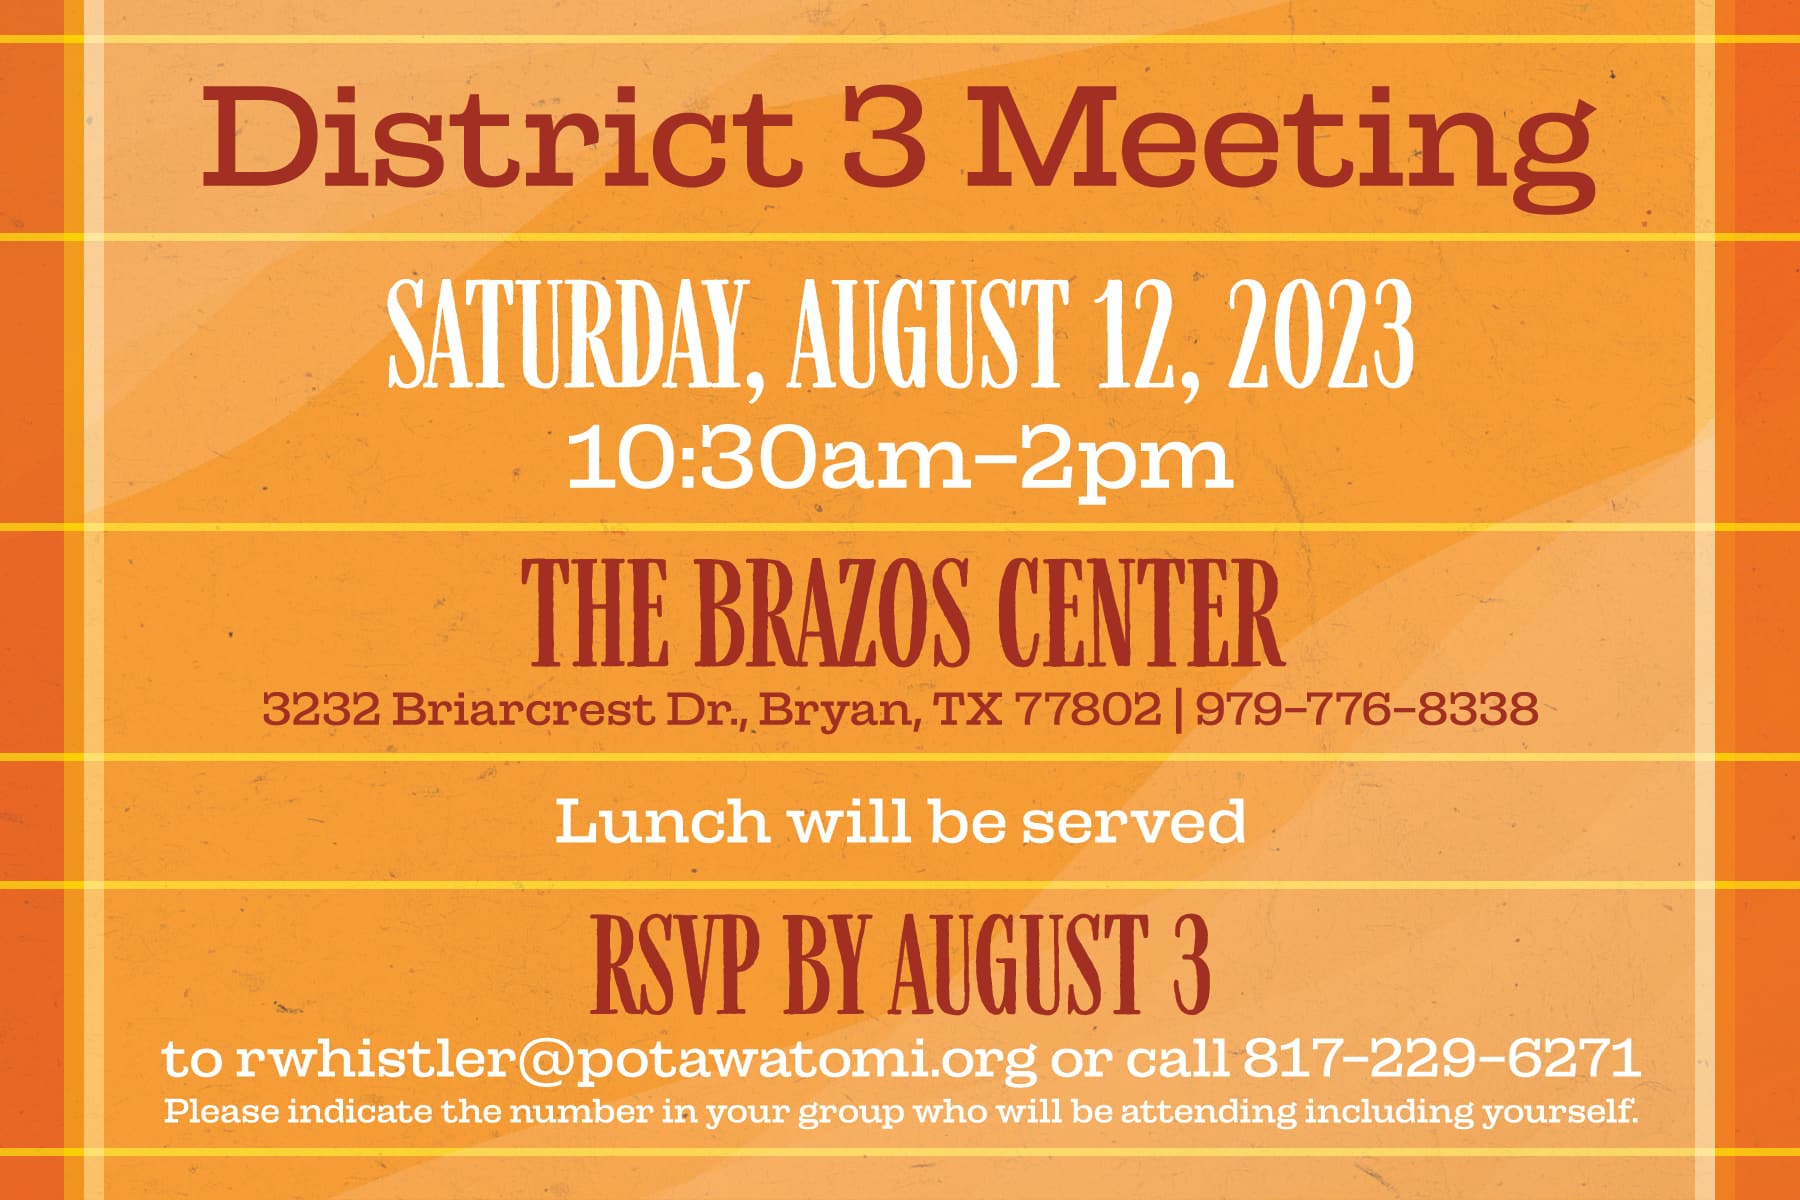 Orange background with white and dark orange text announcing the CPN District 3 meeting on August 12, 2023.